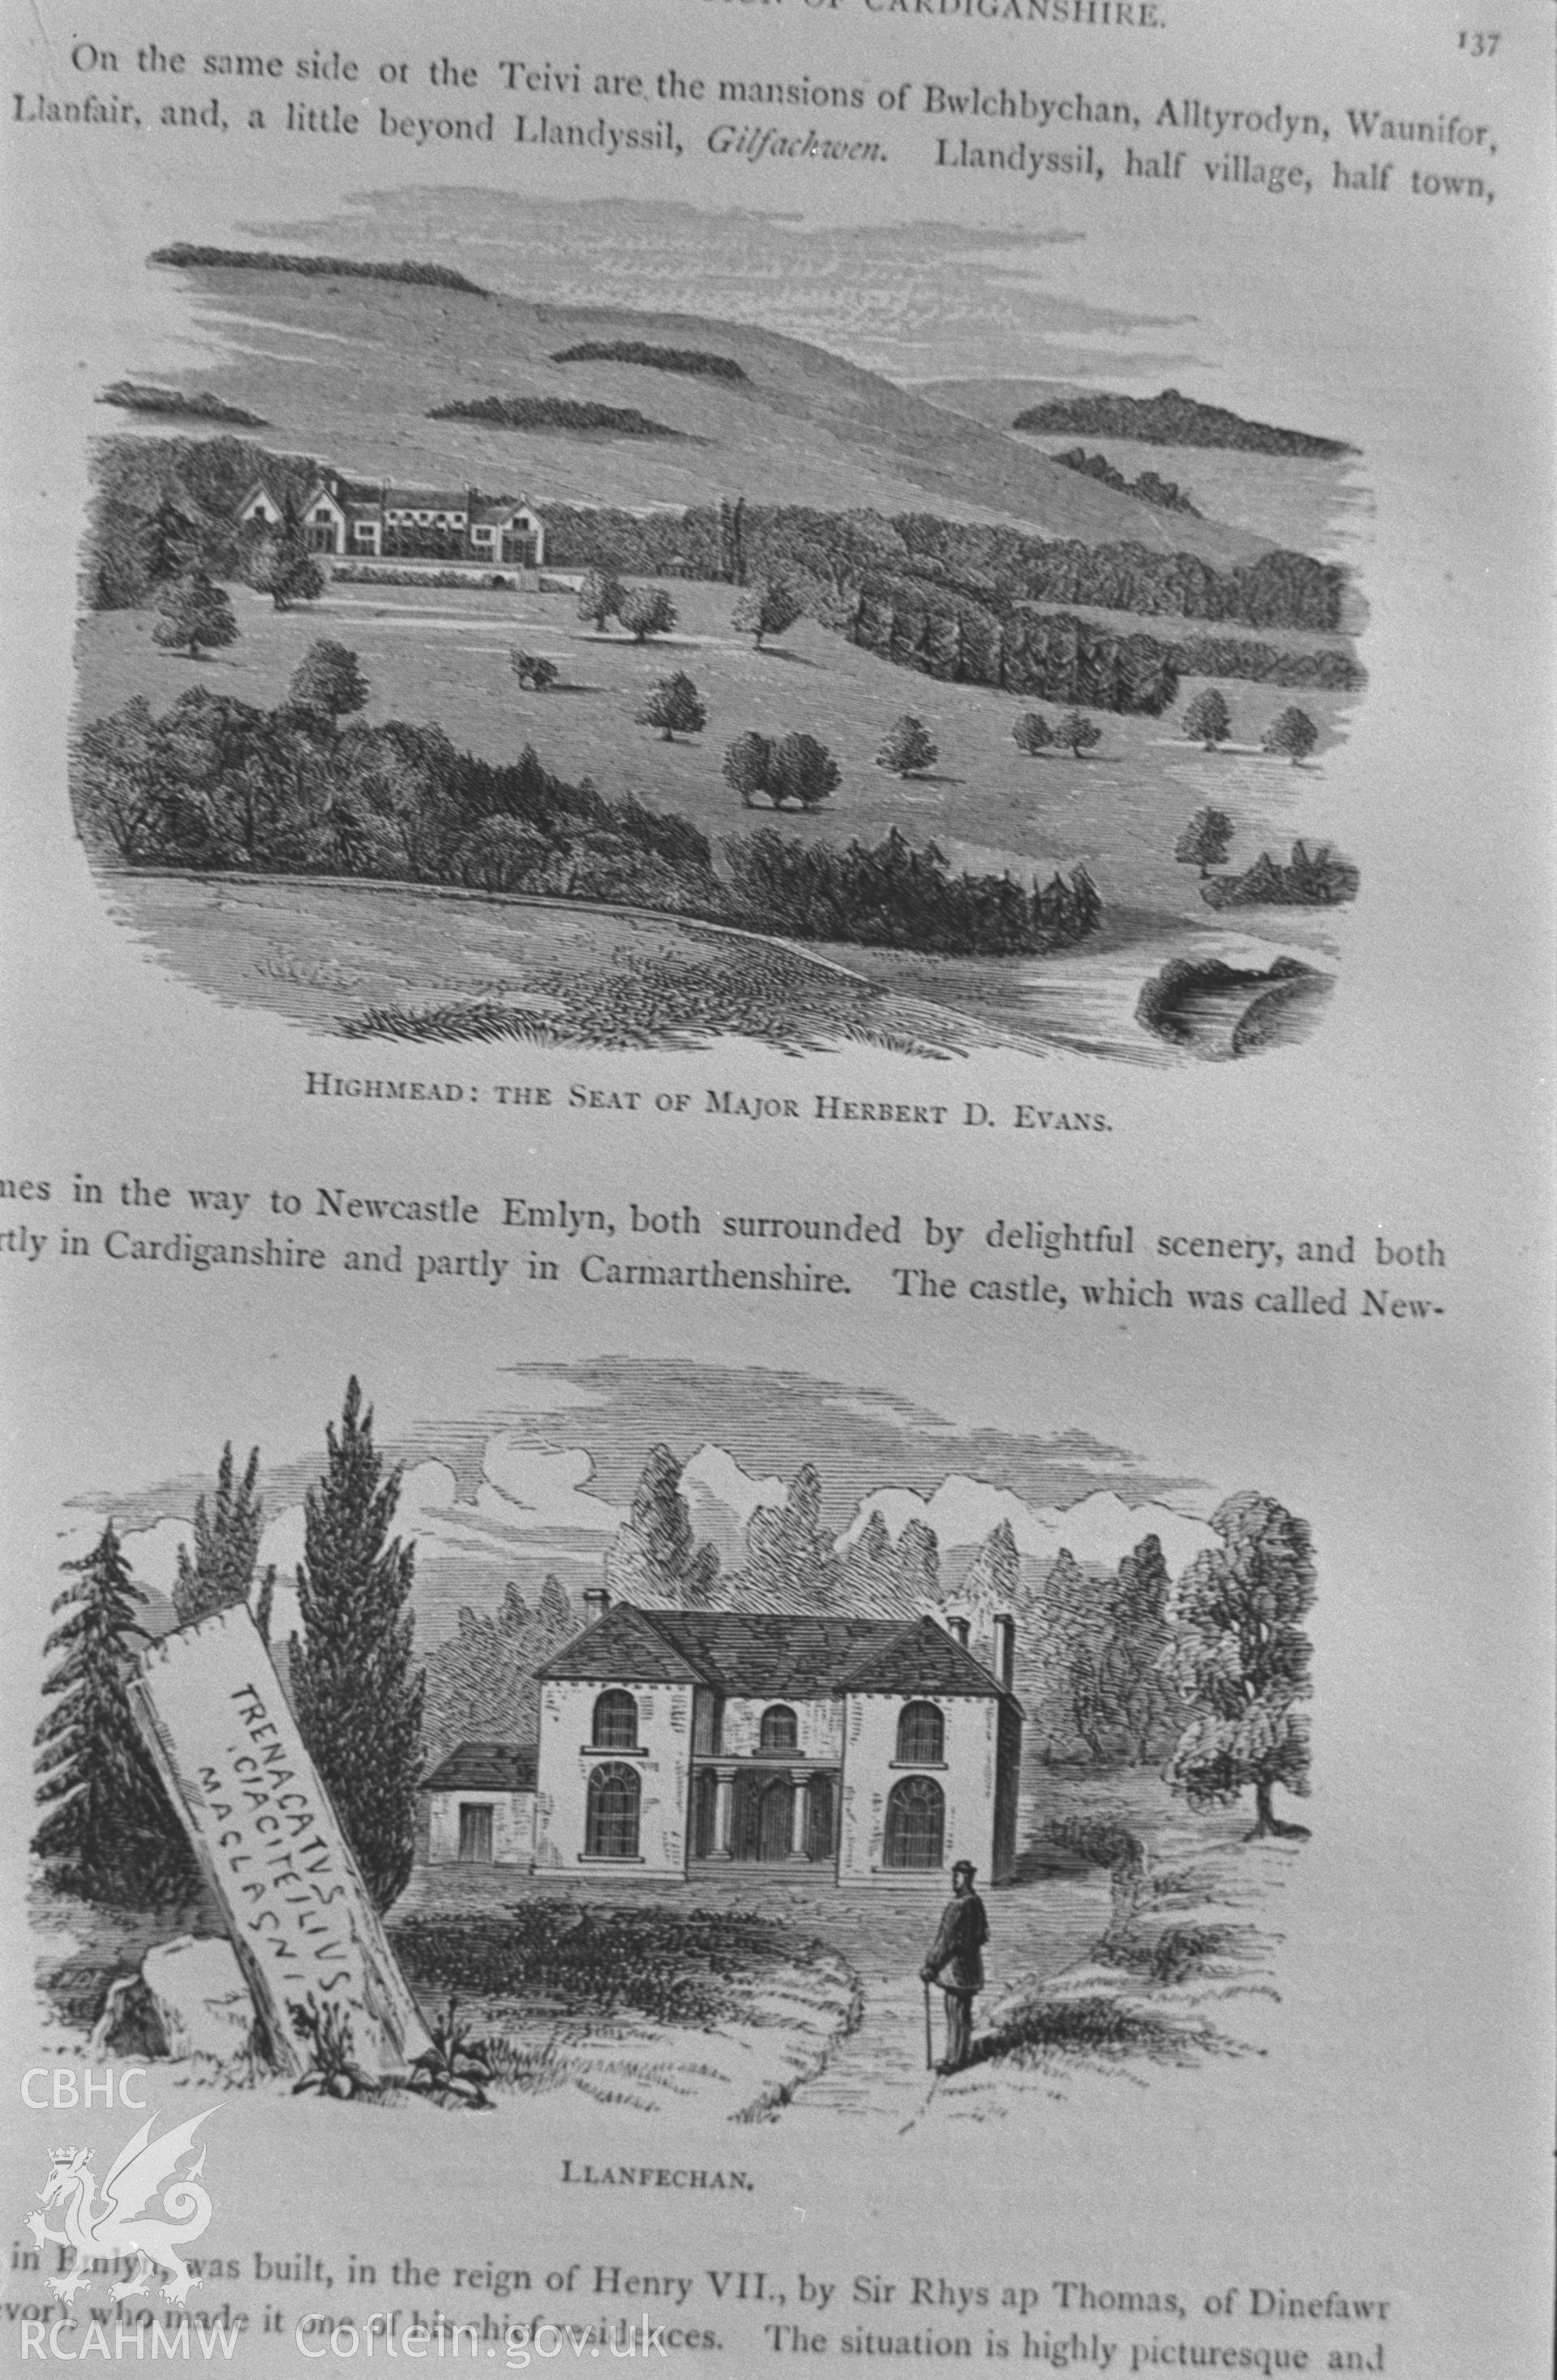 Drawing entitled 'Highmead: The seat of Major Herbert D. Evans' and 'Llanfechan.' From 'Annals of the counties and county families of Wales' vol 1 by Thomas Nicholas, 1872. Photographed by Arthur O. Chater in January 1968 for his own private research.